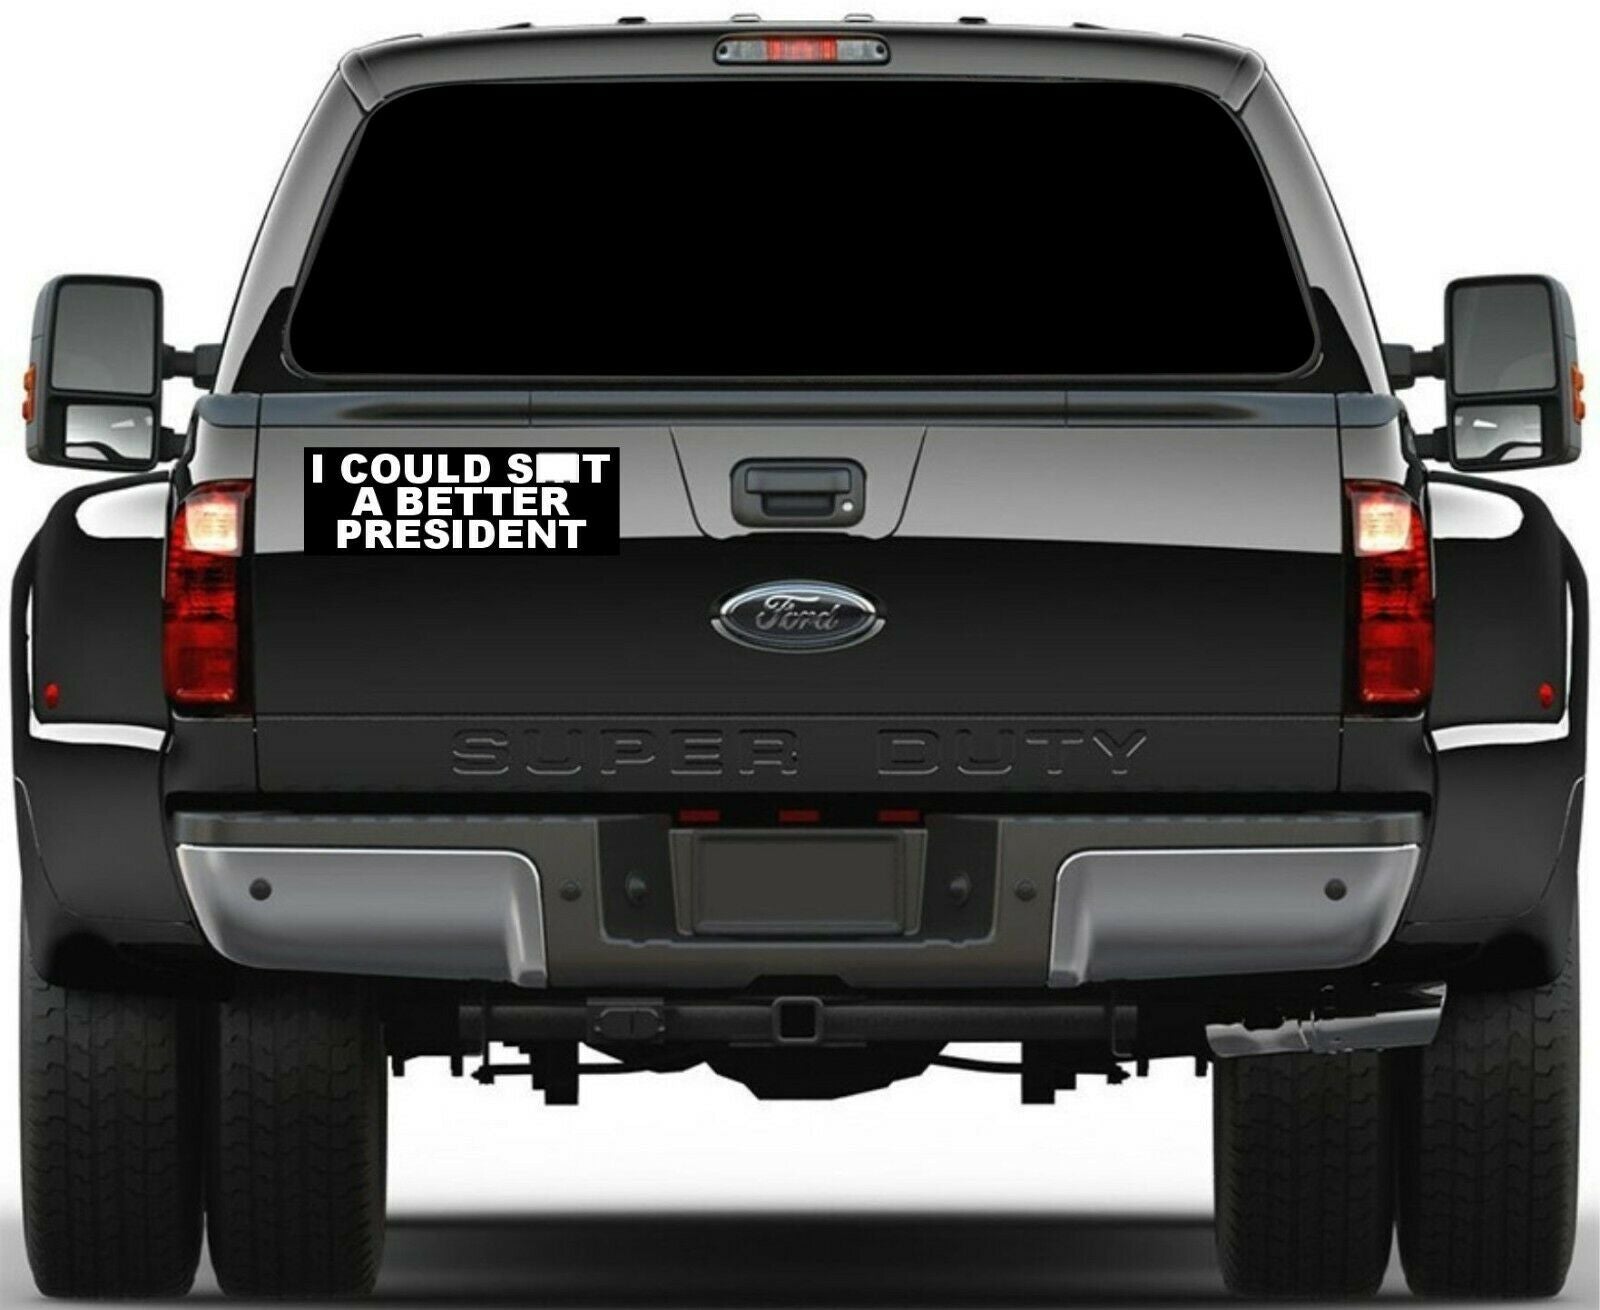 I could Sh*t A Better President MAGNET 8.7" x 3" Bumper or Body Auto Magnet - Powercall Sirens LLC